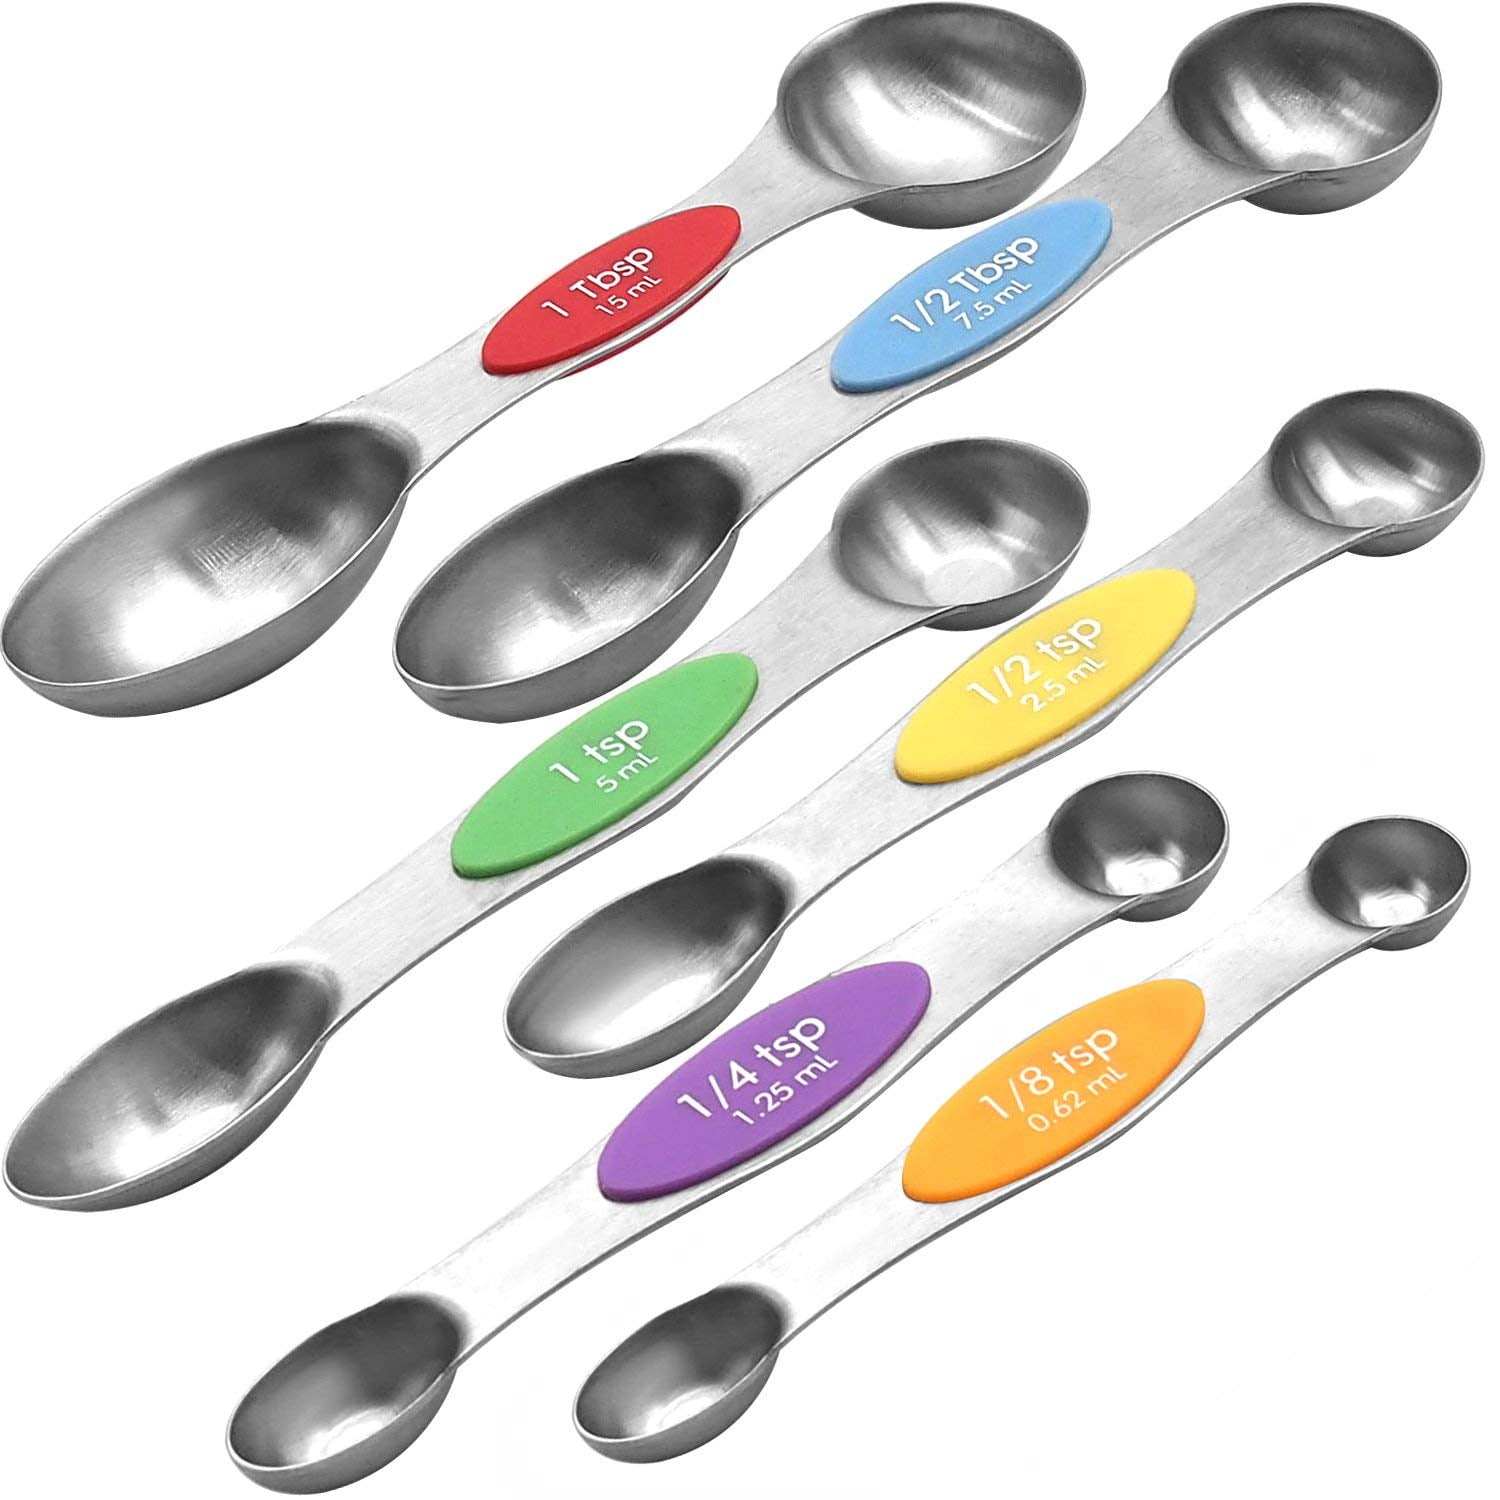 Details about   Premium Stainless Steel  1 Pcs Spoon Rest For Holding Messy Spoon After Stirring 